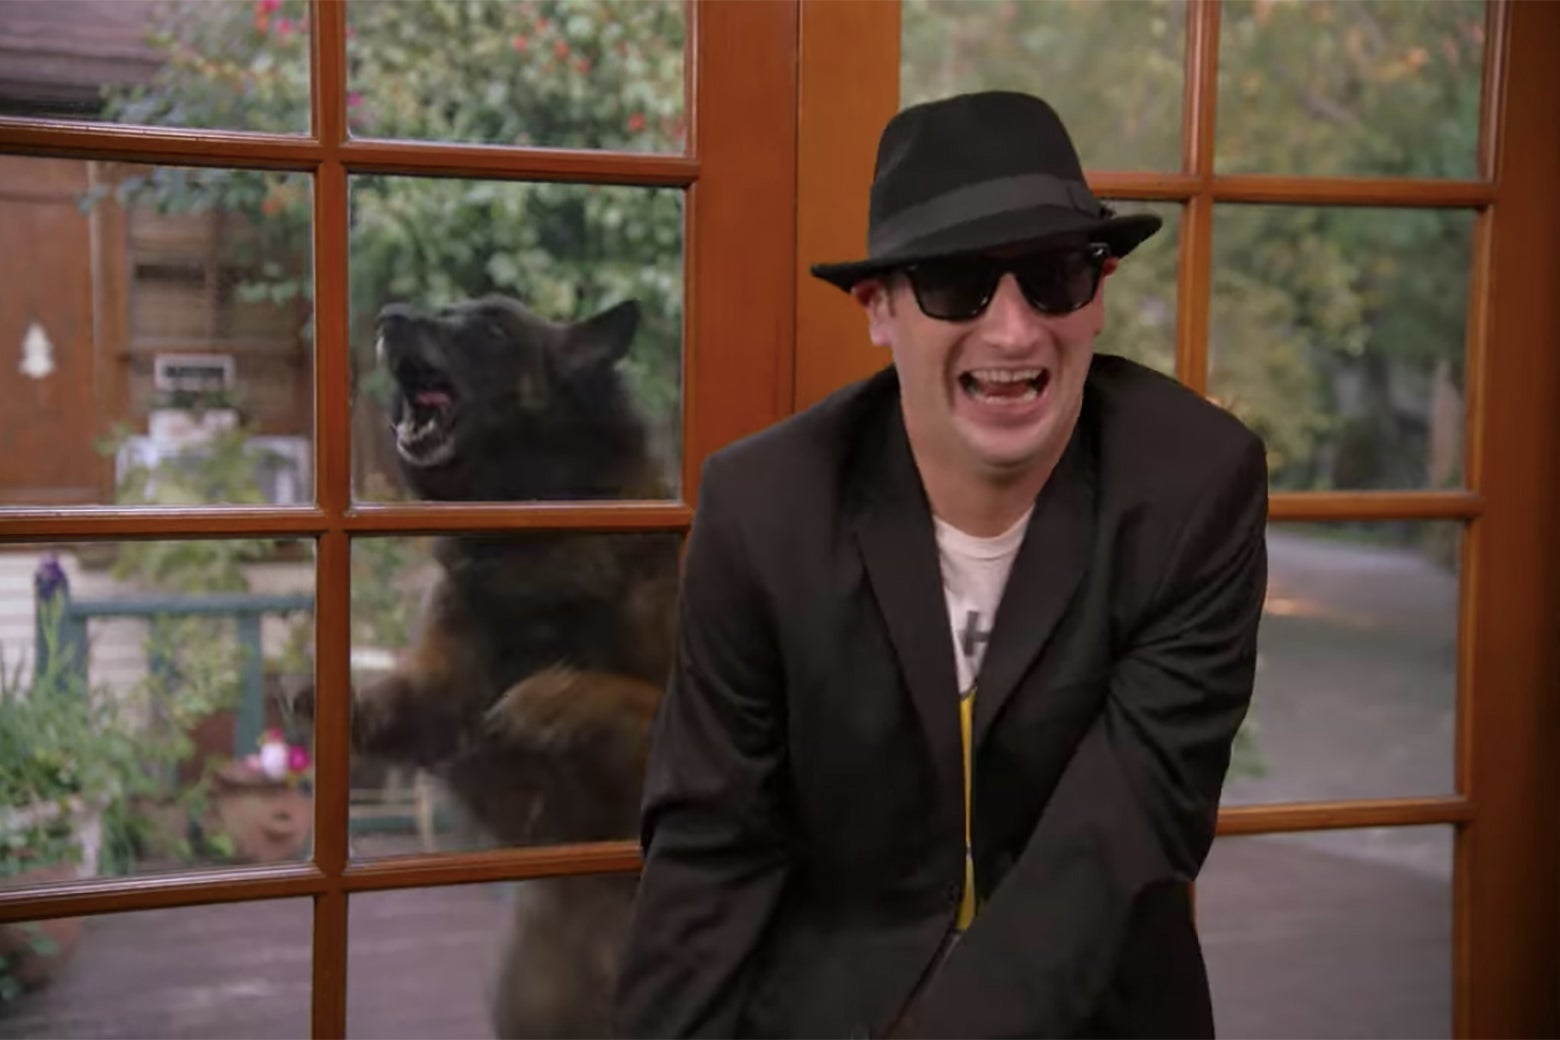 A man in a black suit and sunglasses, with a growling bear behind him.